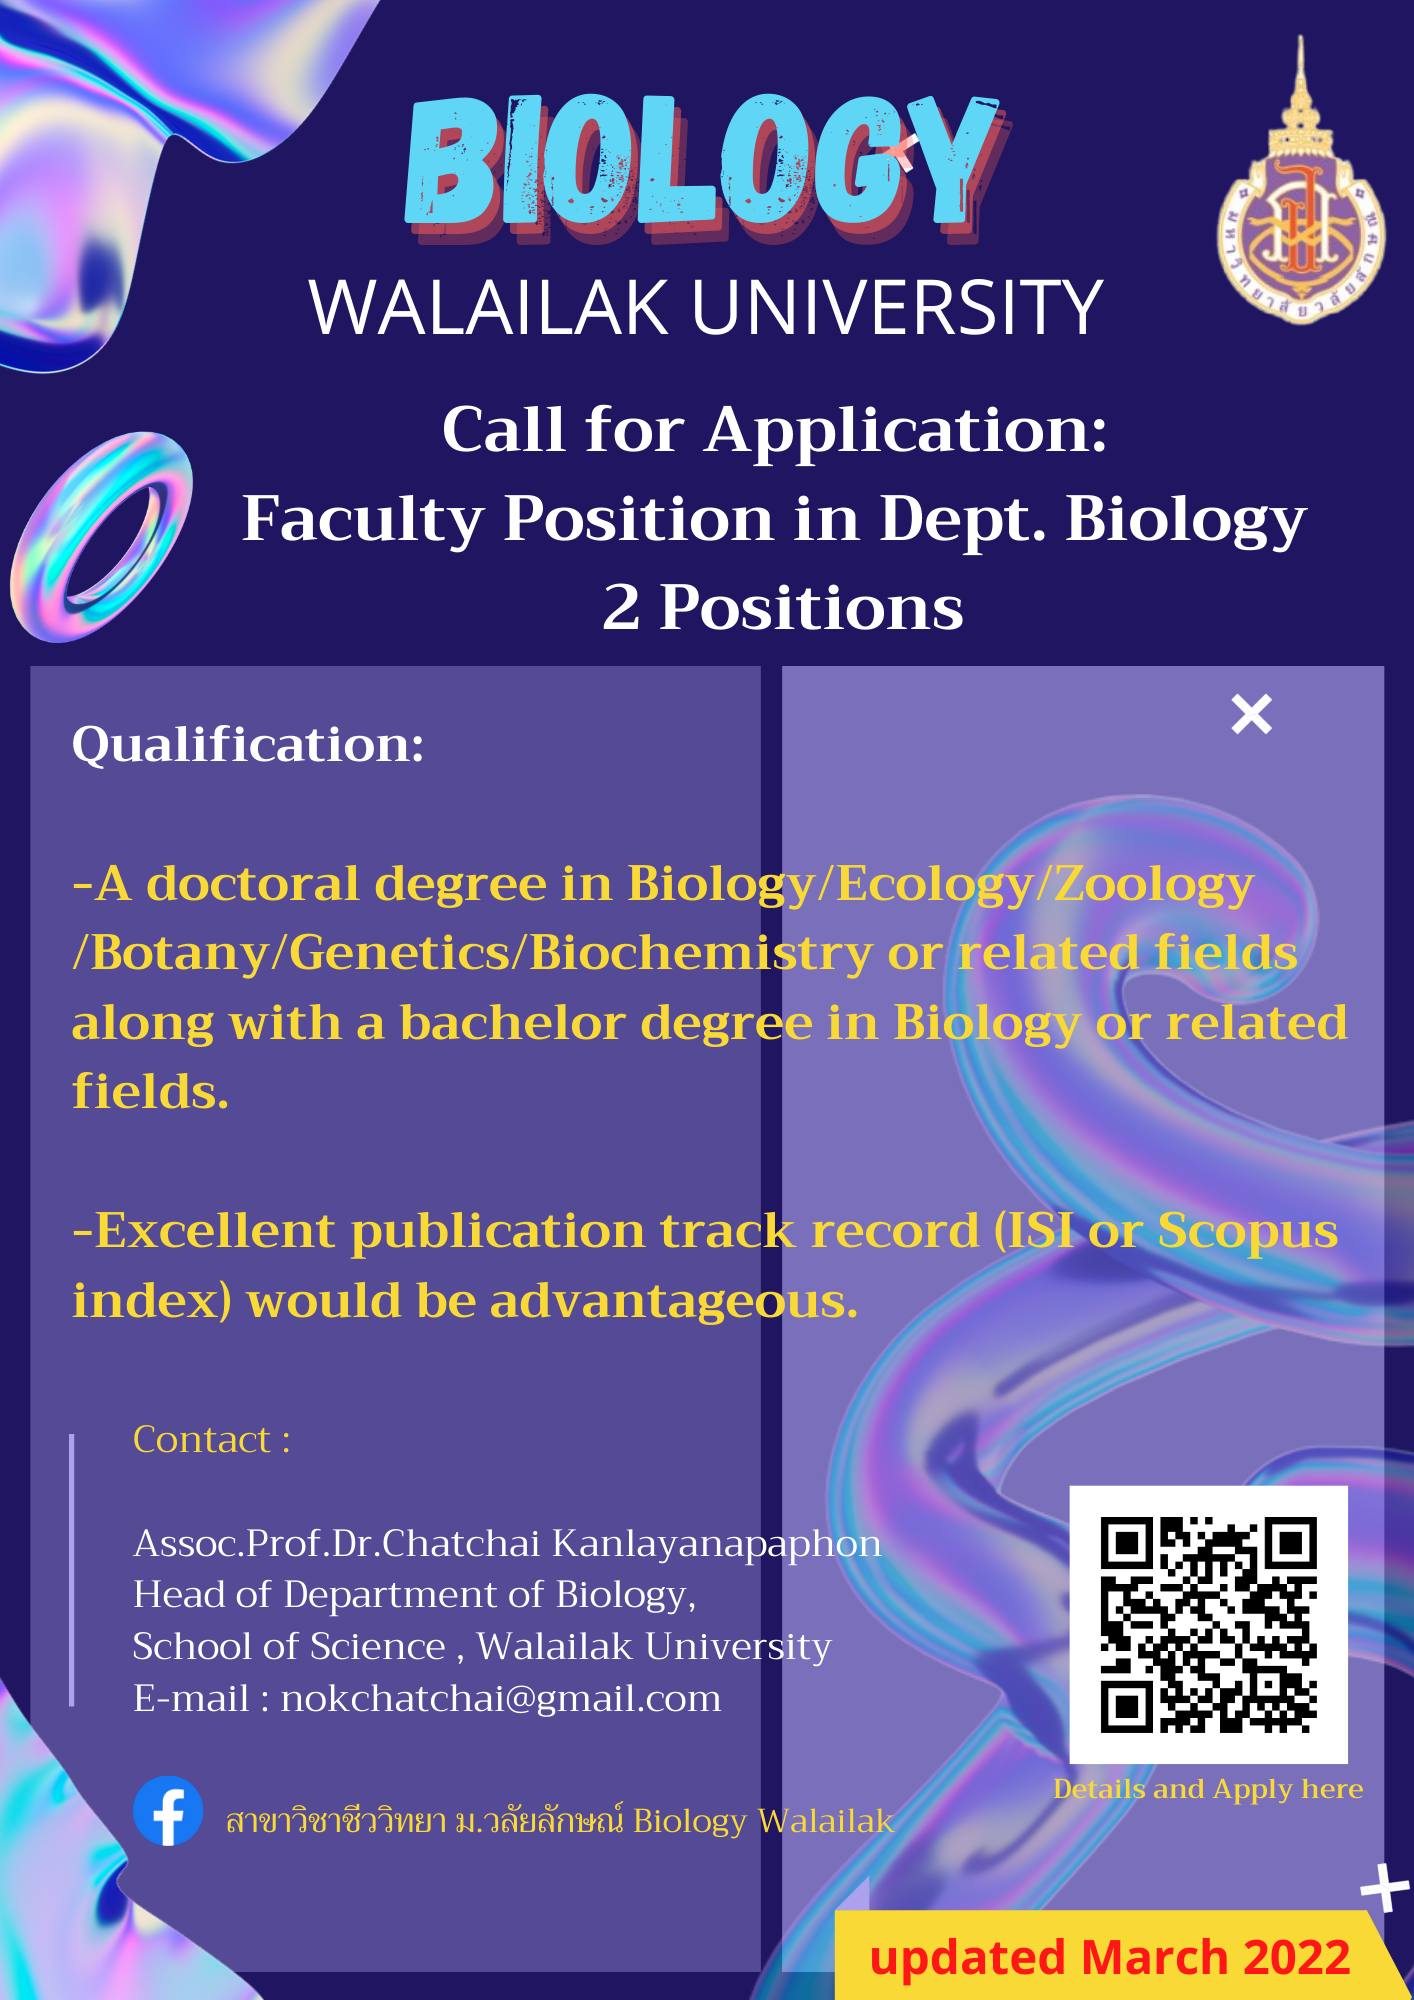 Call for Application: Faculty Position in Dept. Biology 2 Positions